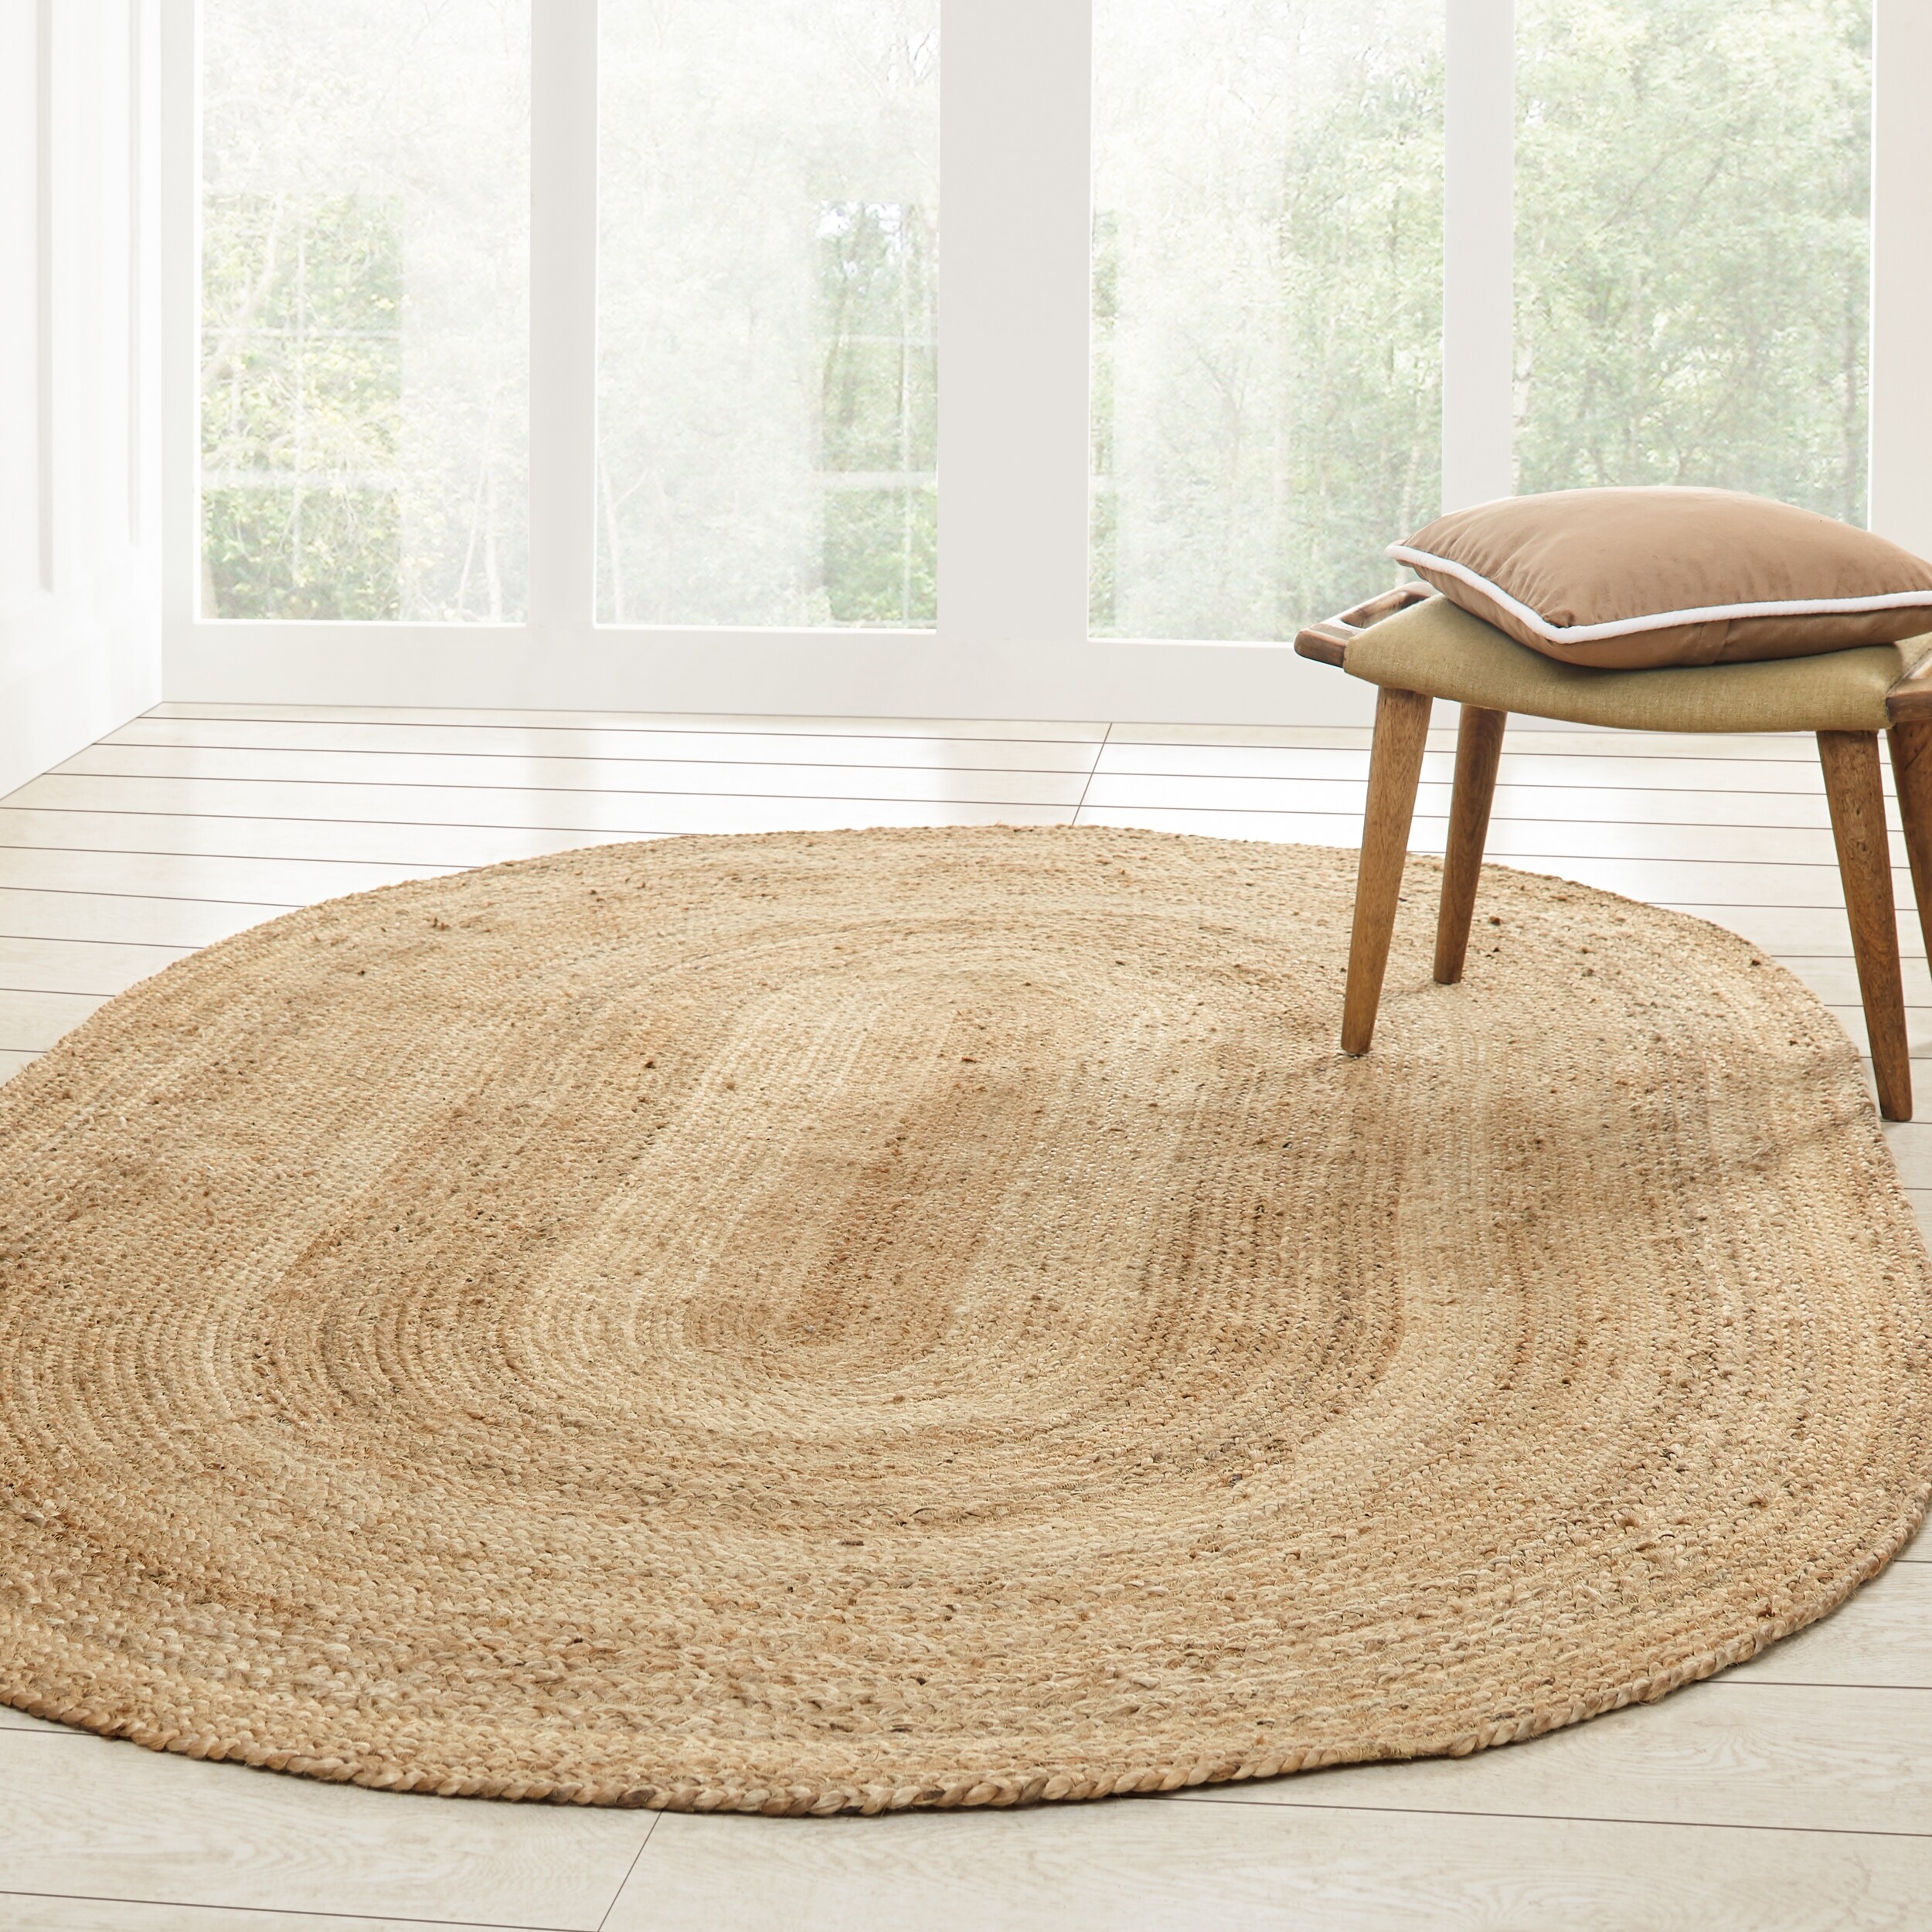 Extra Large Round Floor Rug Hand Braided Flate Woven Jute Rug 4 Sizes Natural